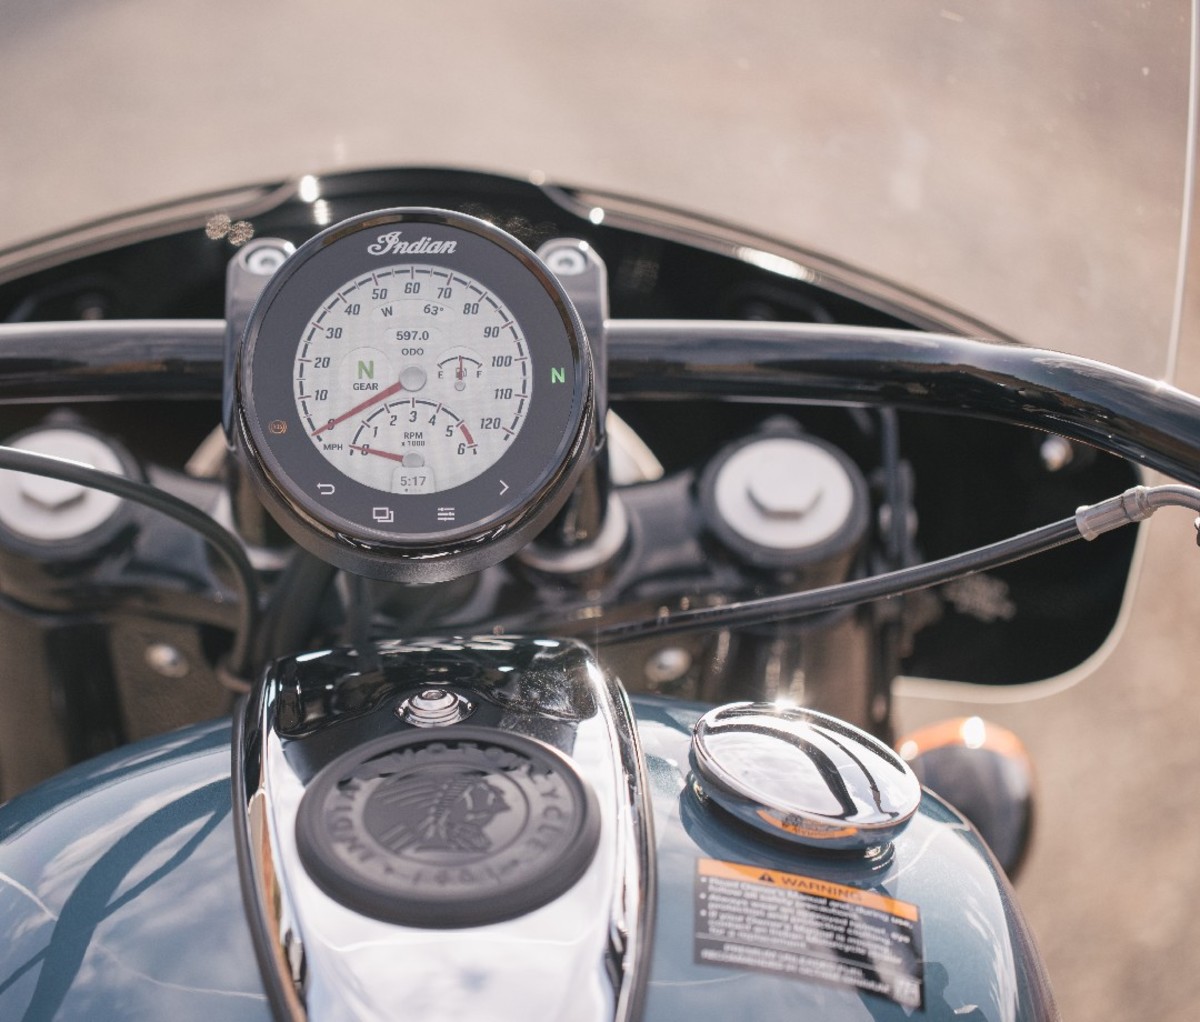 Closeup of speedometer on 2022 Indian Super Chief Motorcycle